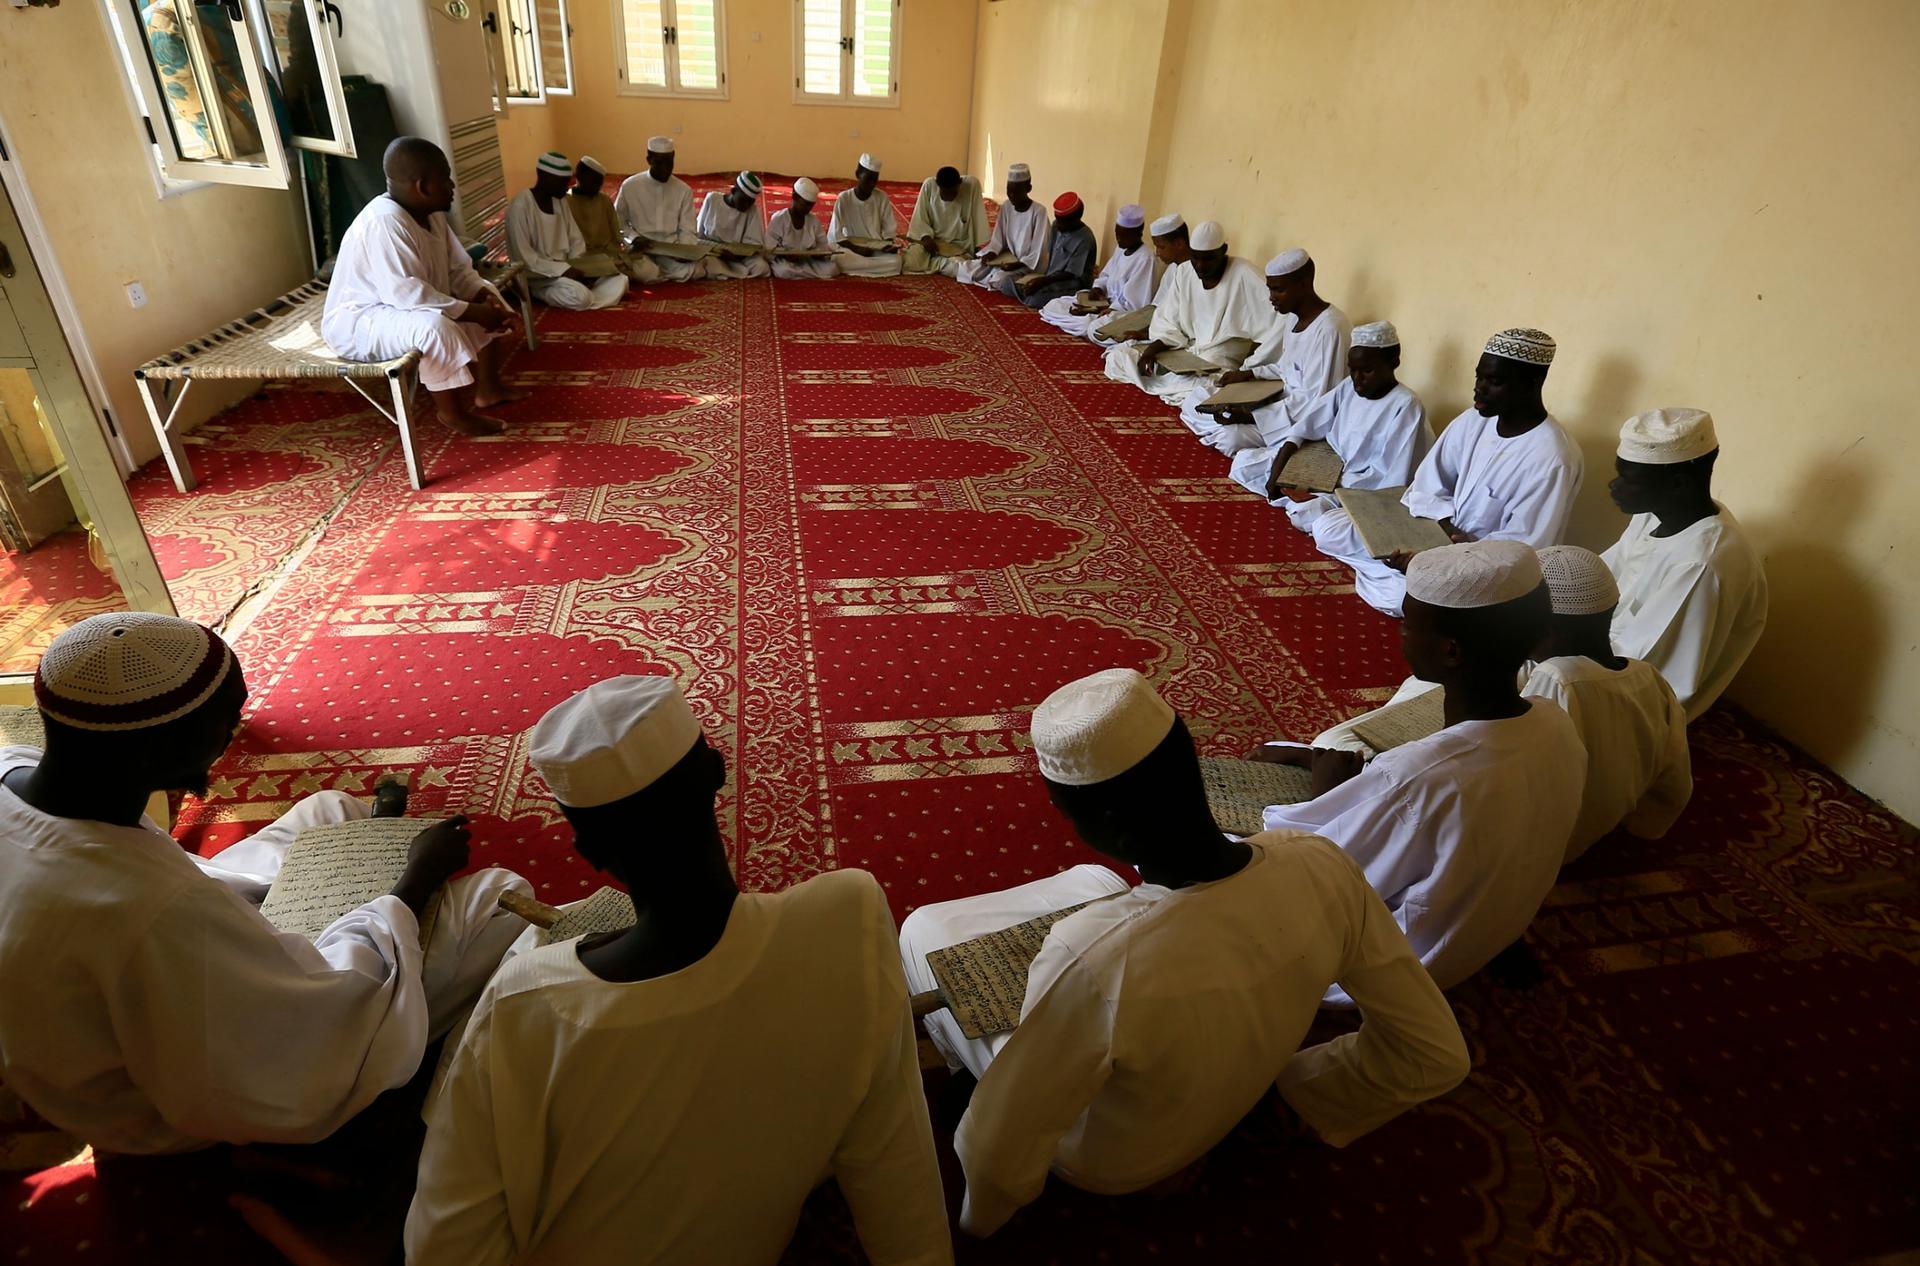 A large group of young men are shown sitting in a half circle on the ground and holding wooden boards with Islamic text.